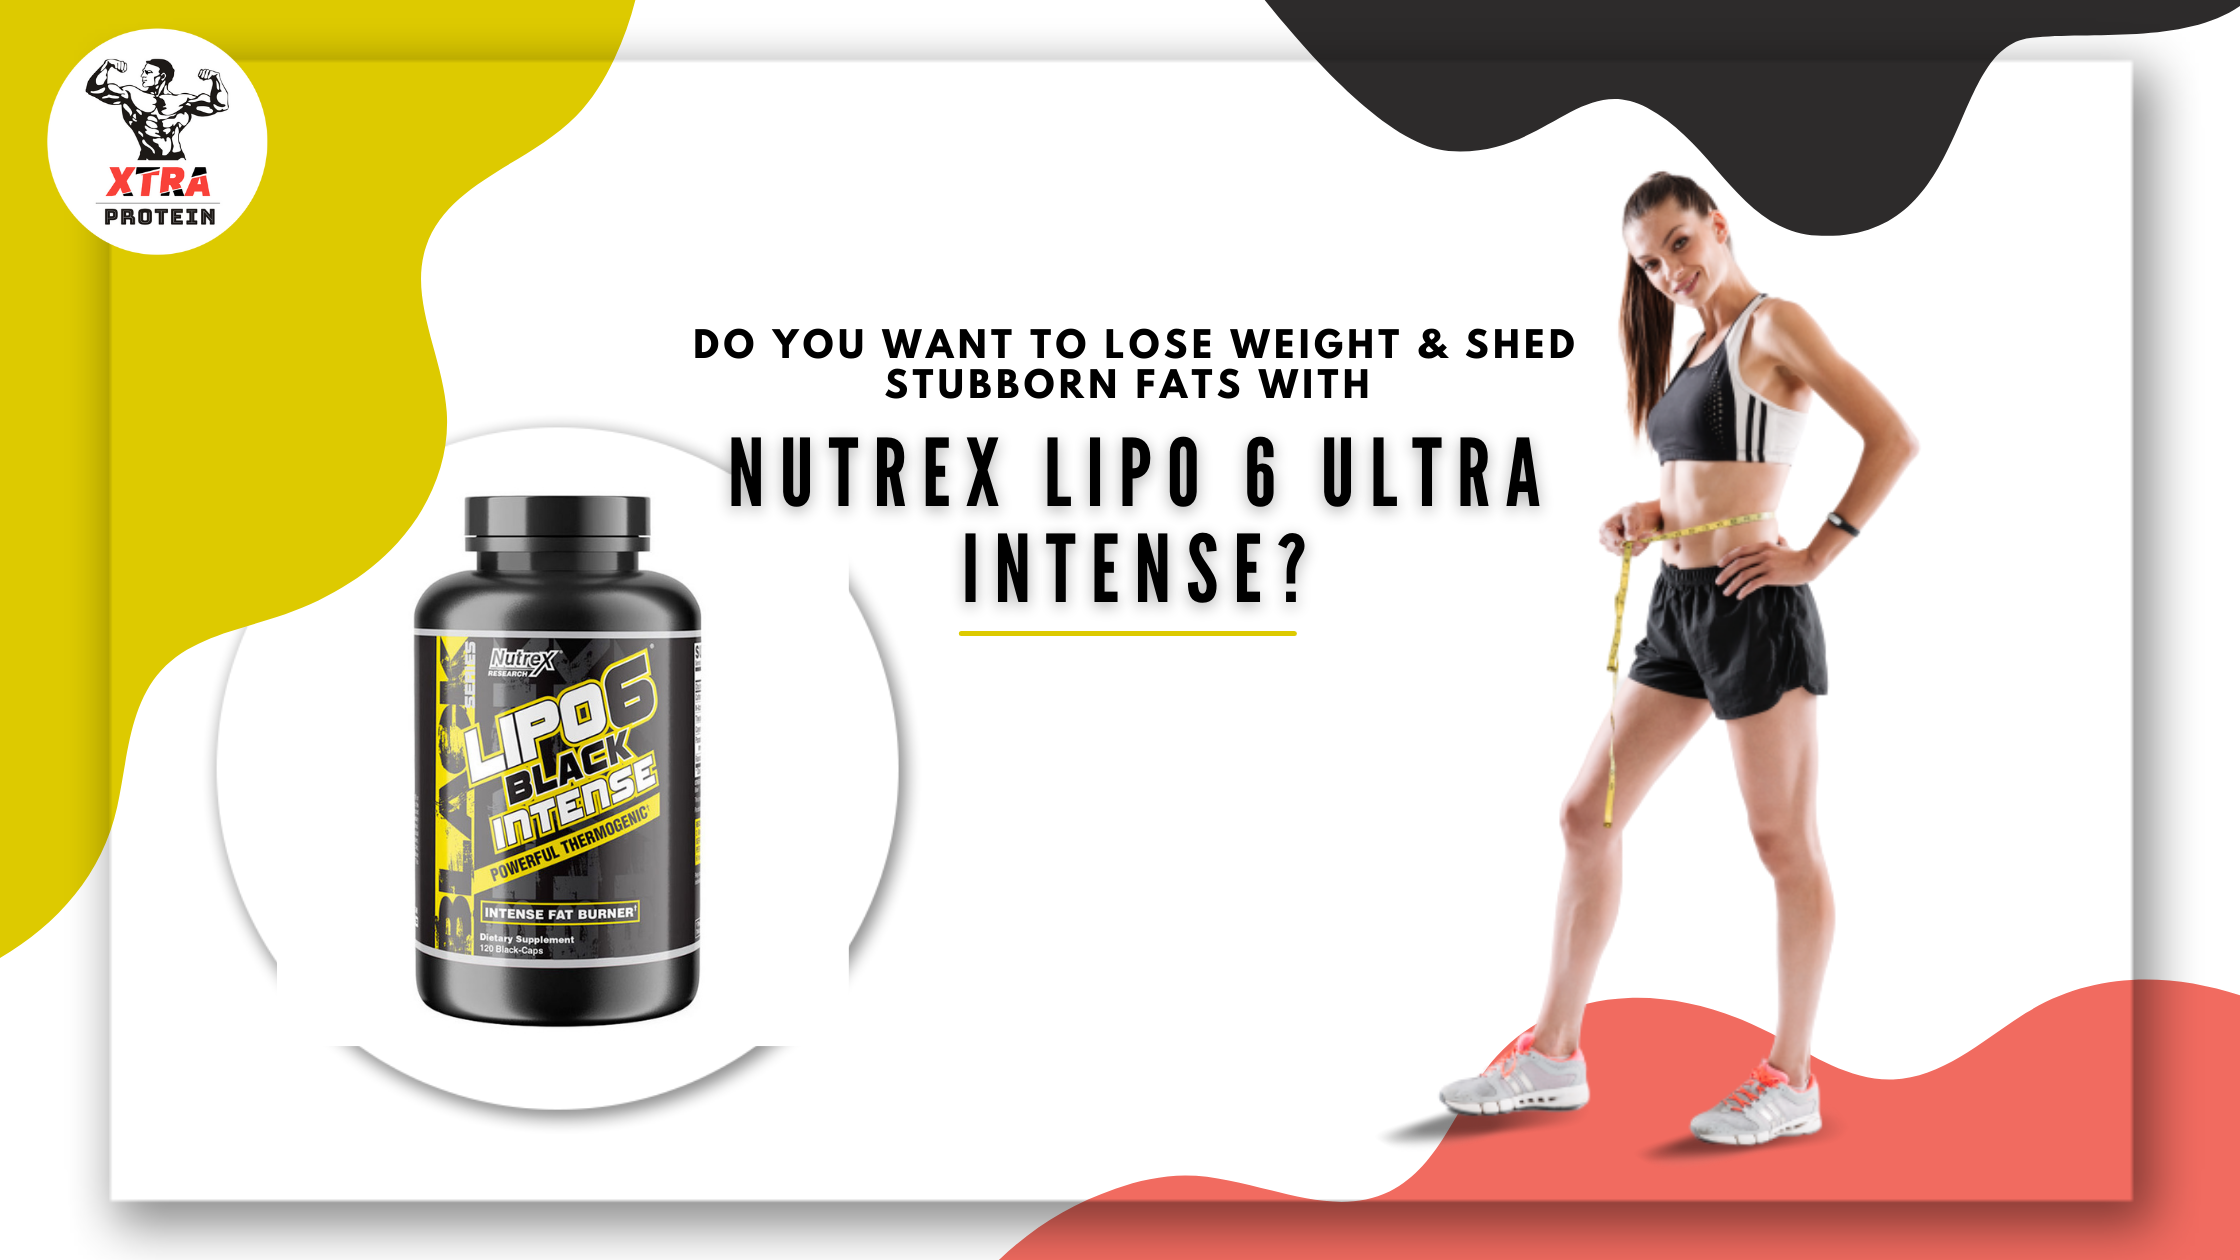 Do you want to lose weight & shed stubborn fats with Nutrex Lipo 6 Ultra Intense?